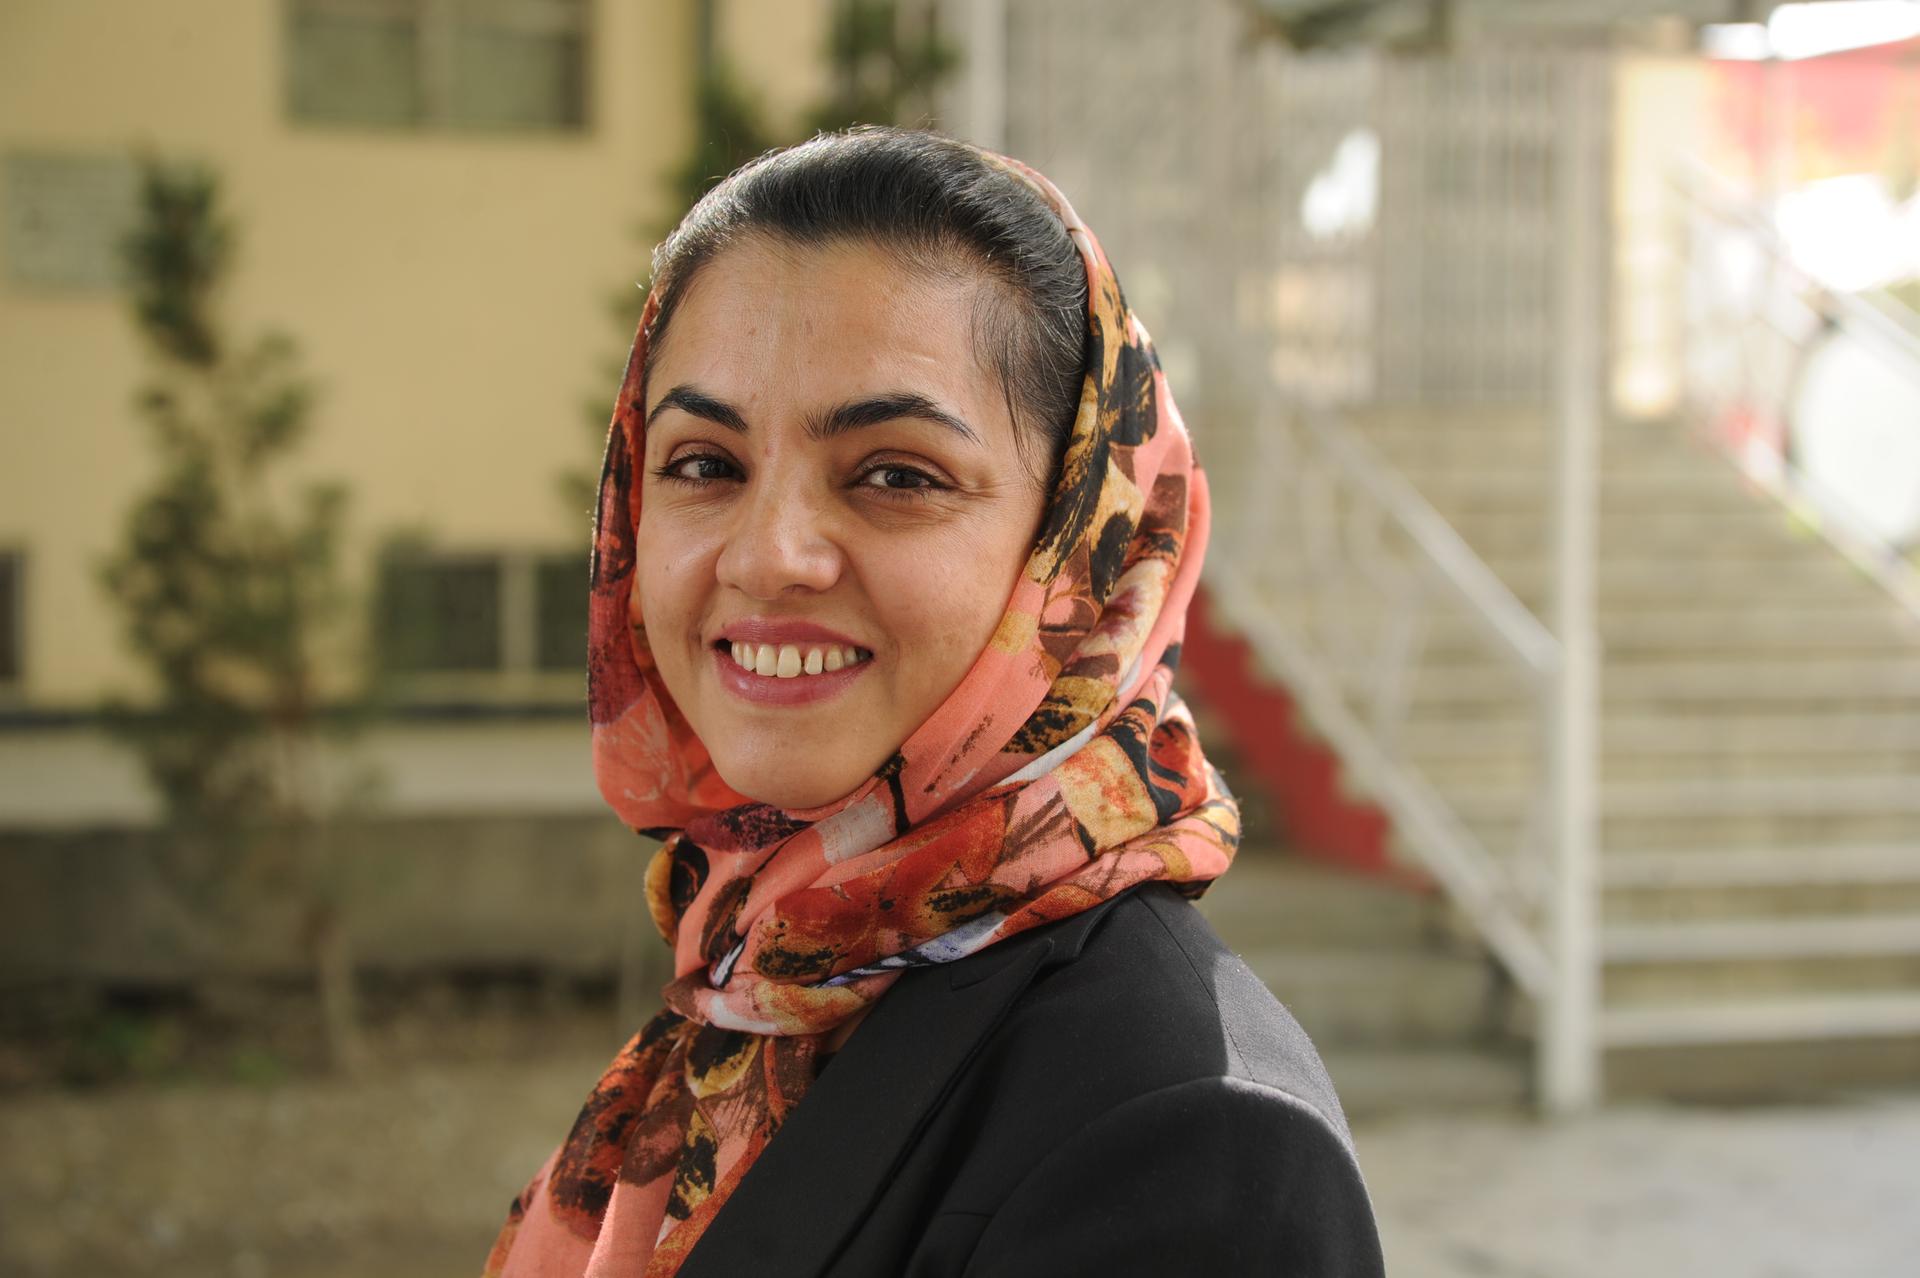 Feroza Mushtari is the health adviser to Afghanistan's first lady. She is also a long time advocate for maternal health in the country.